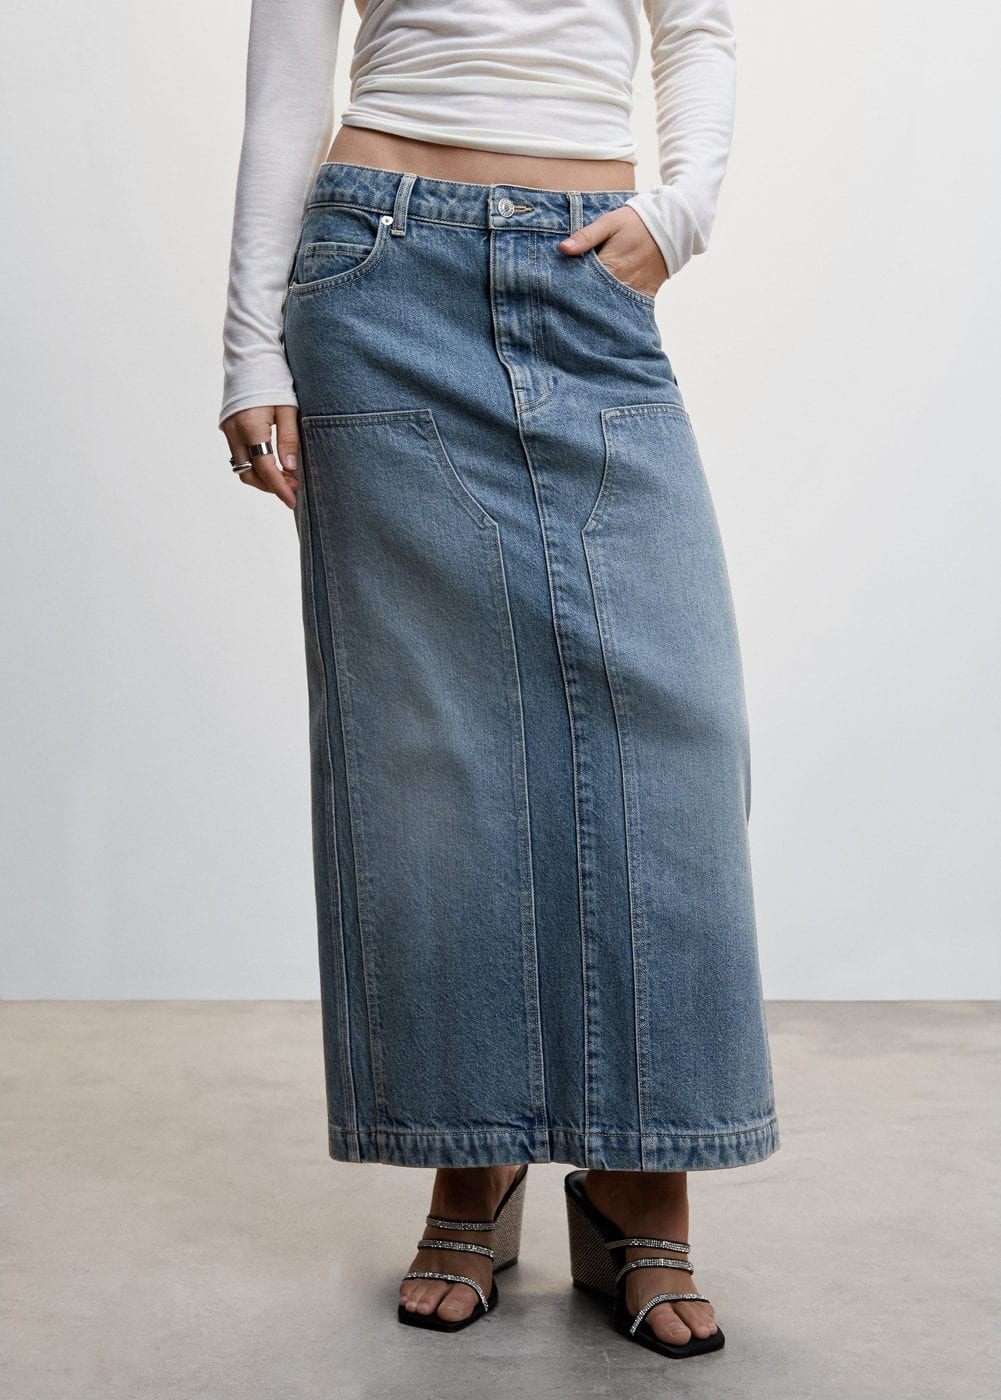 How to Style Denim Skirts: 5 Chic Jean-Skirt Outfits | Who What Wear